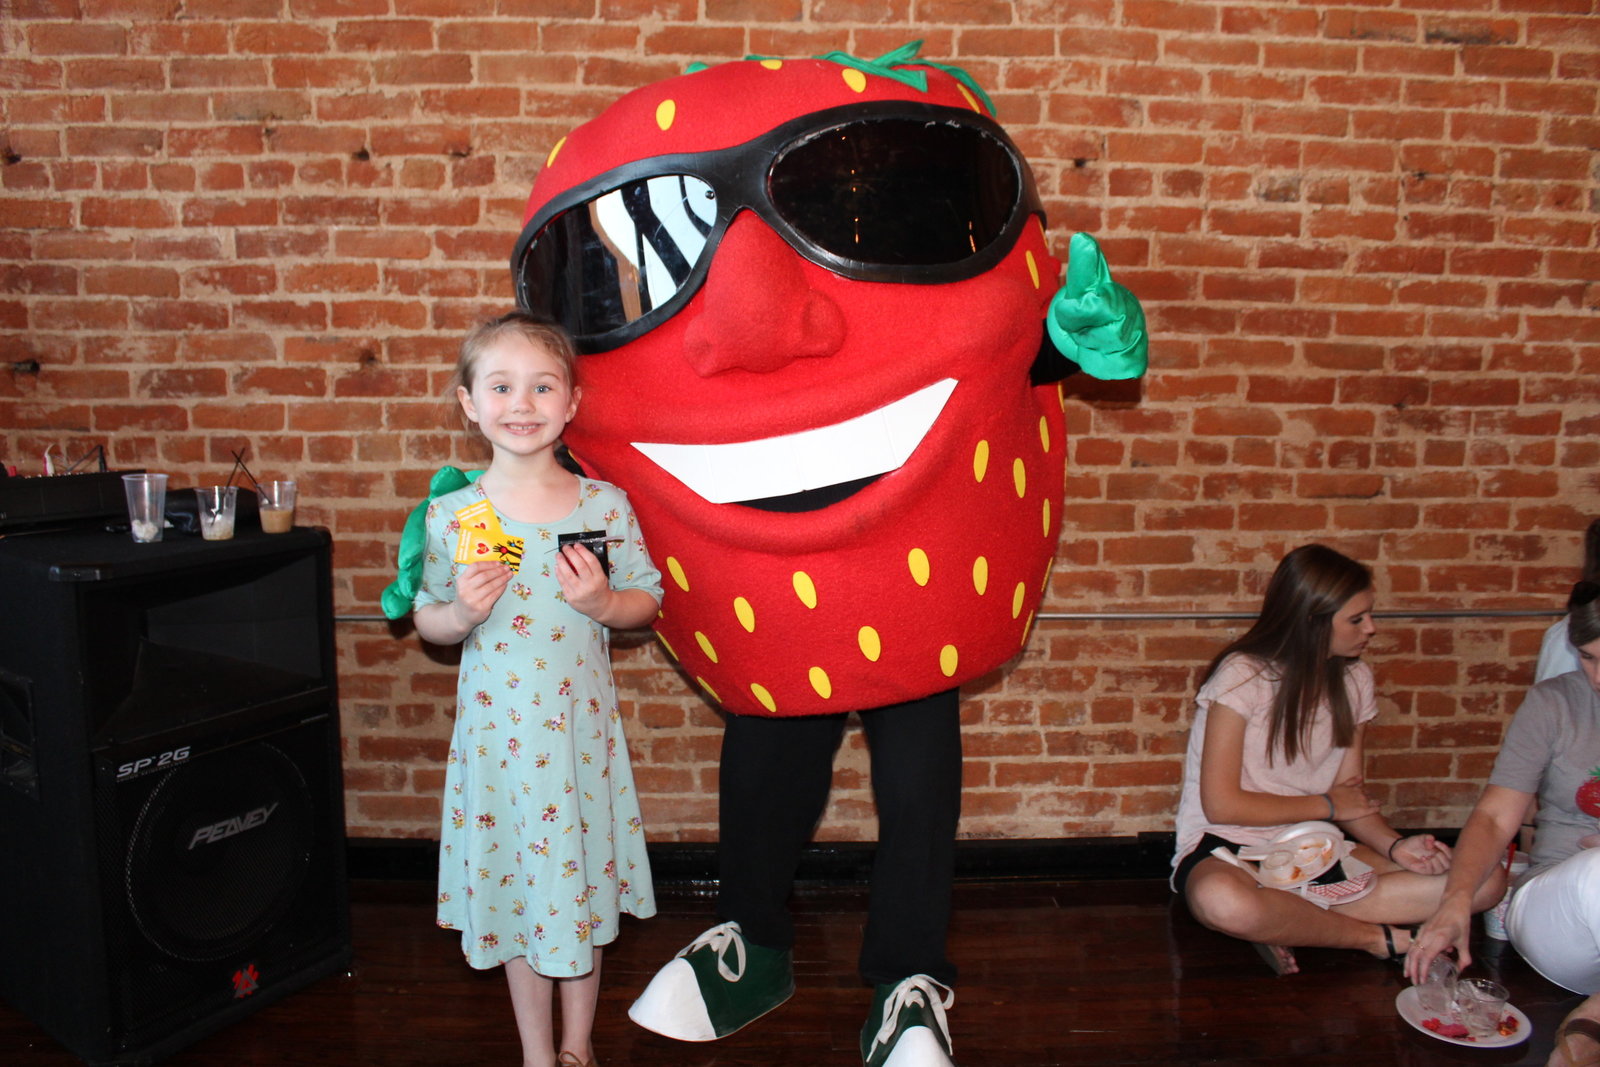 West Tennessee Strawberry Festival - Humboldt TN - Recipe Contest21